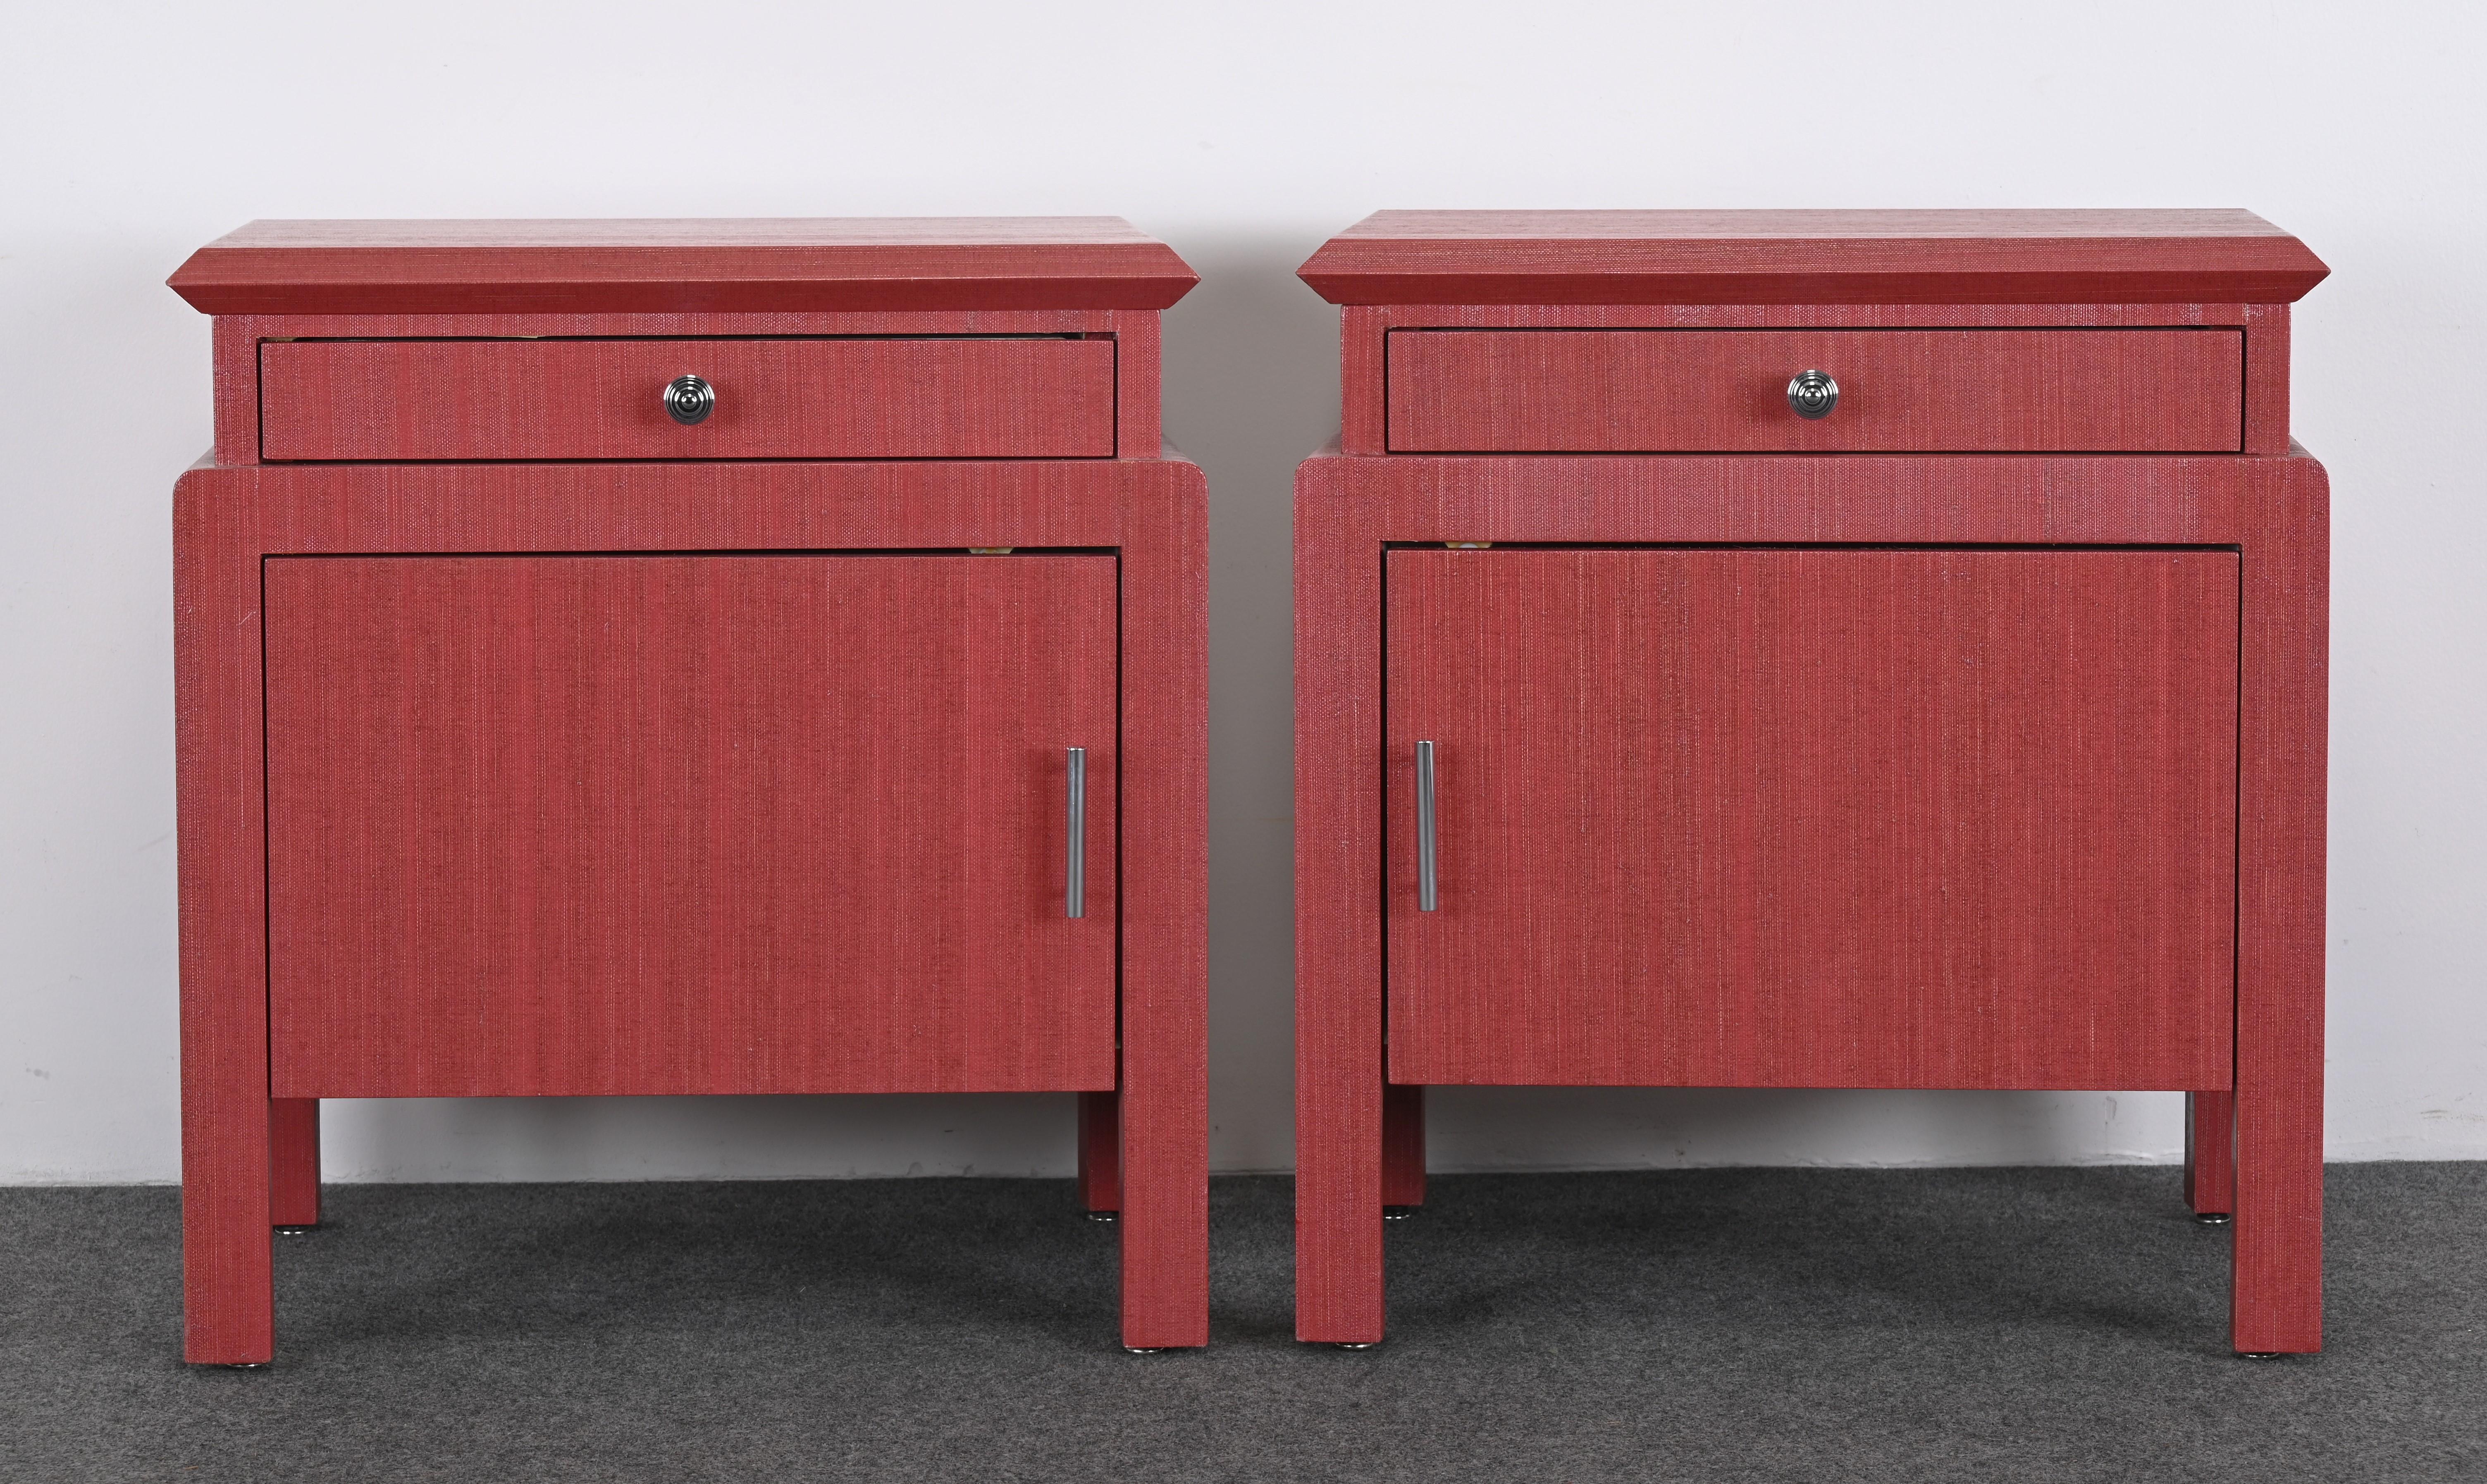 A lovely pair of linen-wrapped coral-tone bedside tables or nightstands attributed to Harrison Van Horn. These bedside tables have a great size and scale and would look great in any bedroom. The end tables have interesting chrome handles that can be